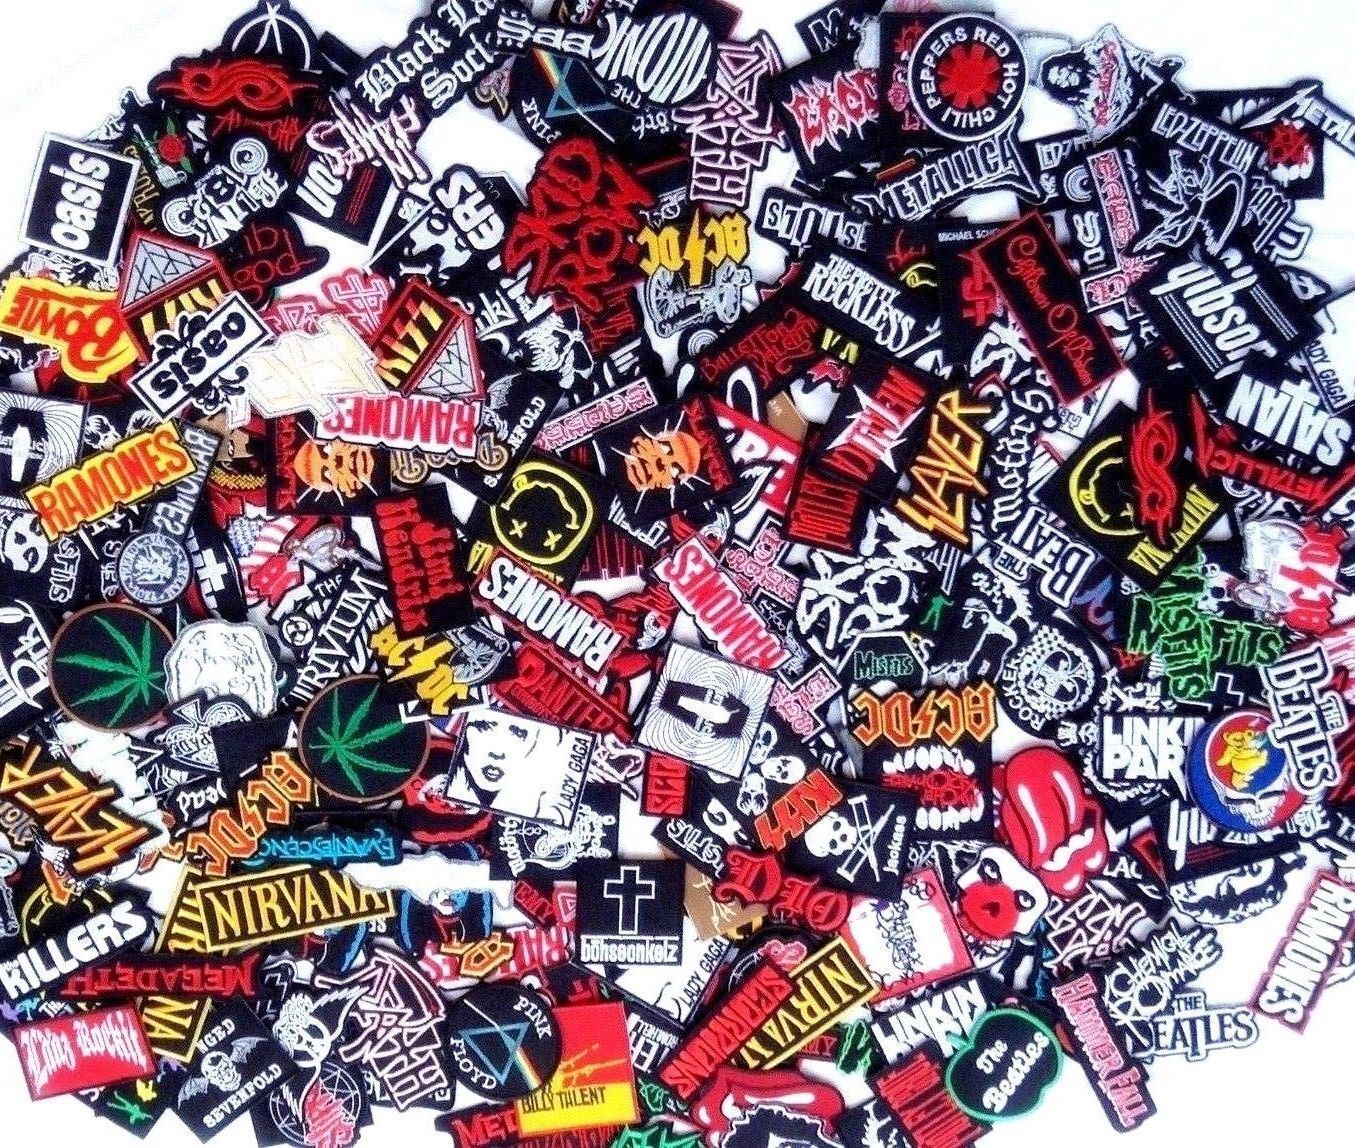 Random Lot of 20 Rock Band Patches Iron on Music Punk Roll Heavy Metal Sew Unbranded Does Not Apply - фотография #6